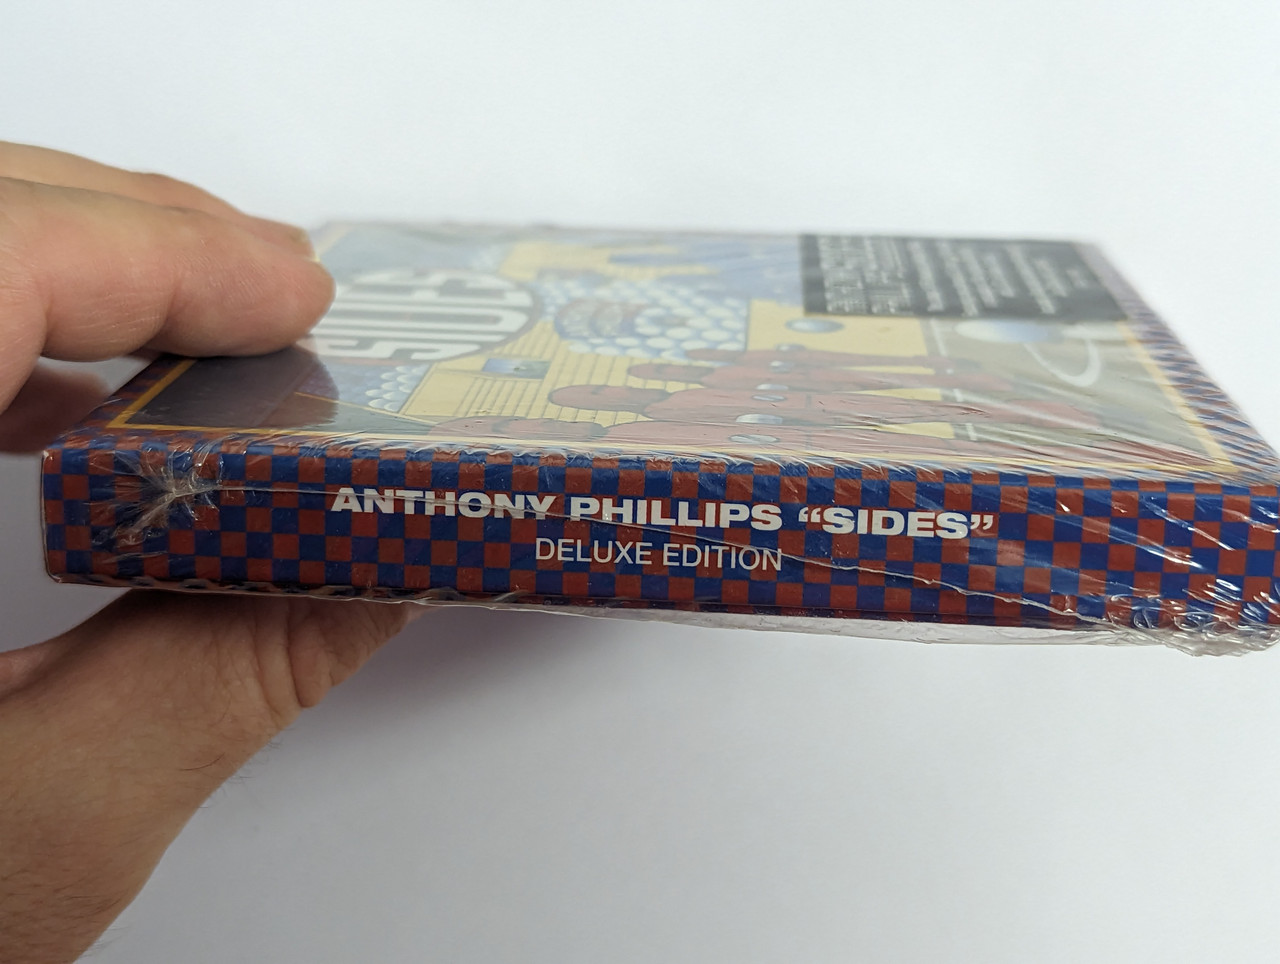 https://cdn10.bigcommerce.com/s-62bdpkt7pb/products/0/images/302578/Anthony_Phillips_Sides_4_Disc_Deluxe_Edition_The_classic_1979_album_by_Anthony_Philips_Featuring_new_stereo_5._1_mixes_of_the_album_a_remaster_of_the_original_stereo_mix_Esoteric_3__79473.1696510874.1280.1280.jpg?c=2&_gl=1*1201att*_ga*MjA2NTIxMjE2MC4xNTkwNTEyNTMy*_ga_WS2VZYPC6G*MTY5NjUxMDI4Ny4xMDg5LjEuMTY5NjUxMDU2OC41MS4wLjA.